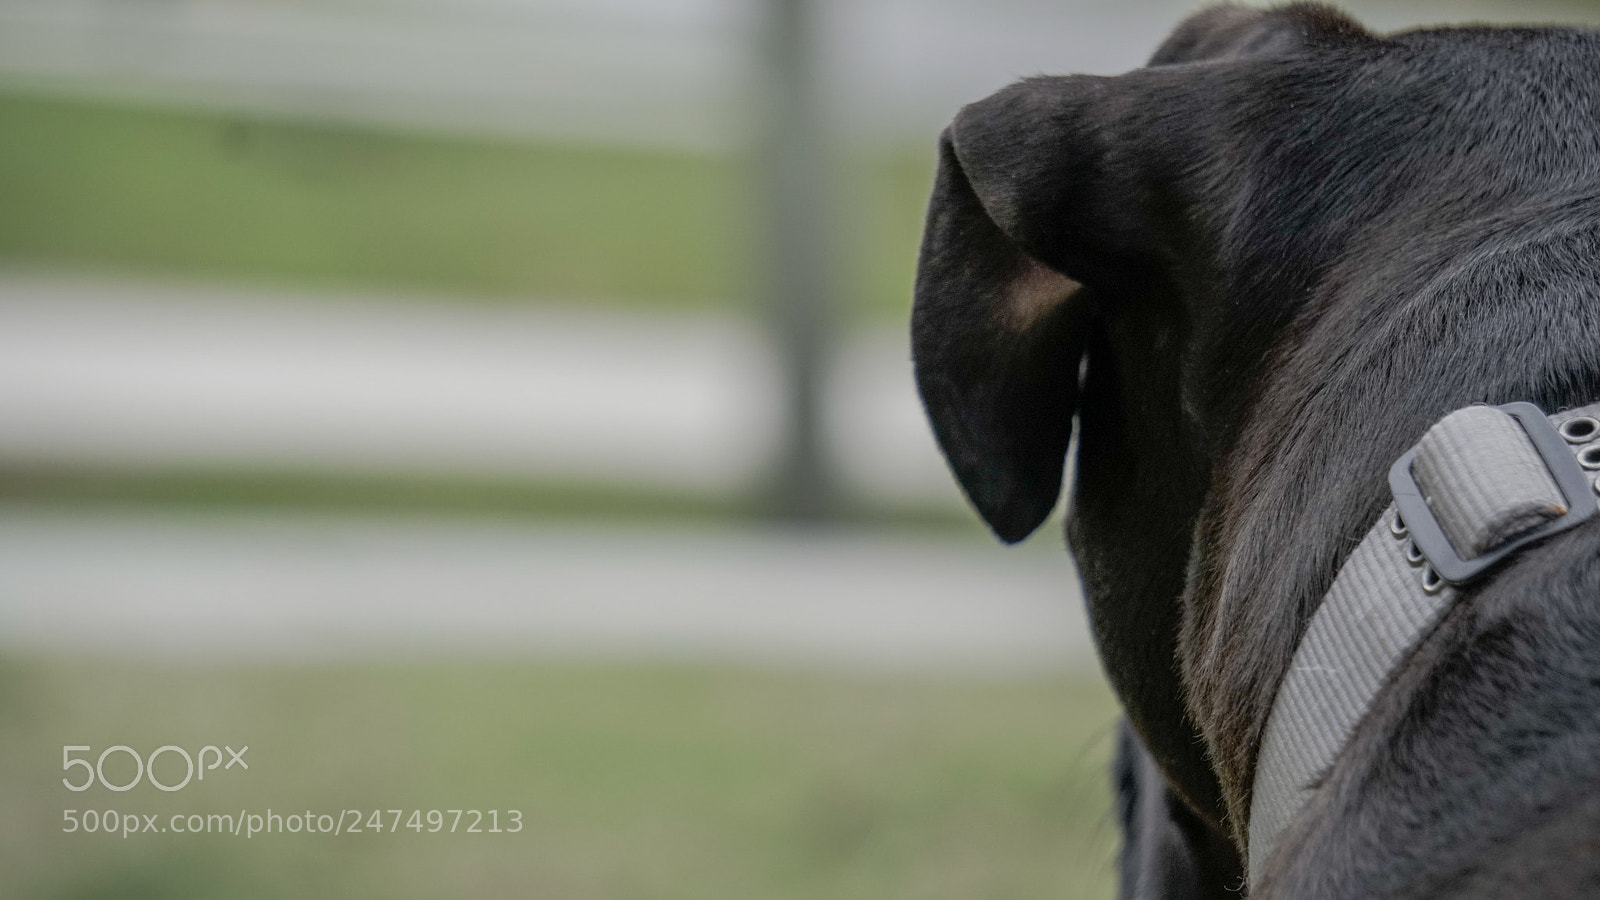 Sony a6500 sample photo. Dog with ears perked photography